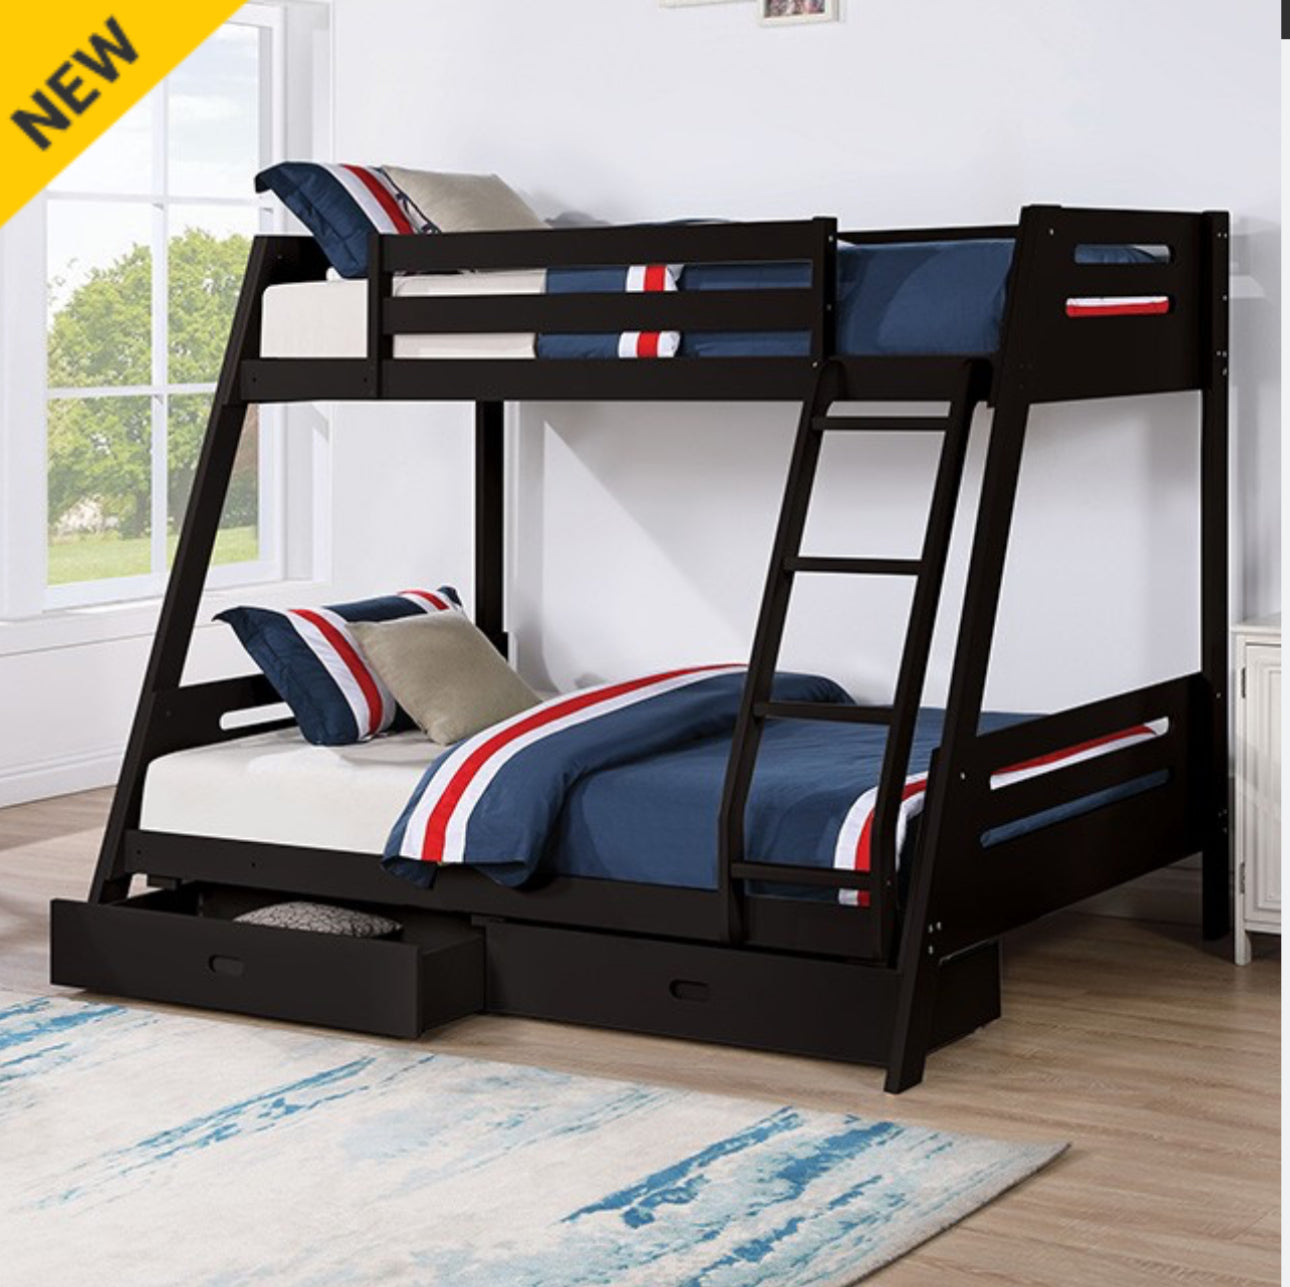 TWIN OVER FULL BUNK BED WITH DRAWERS